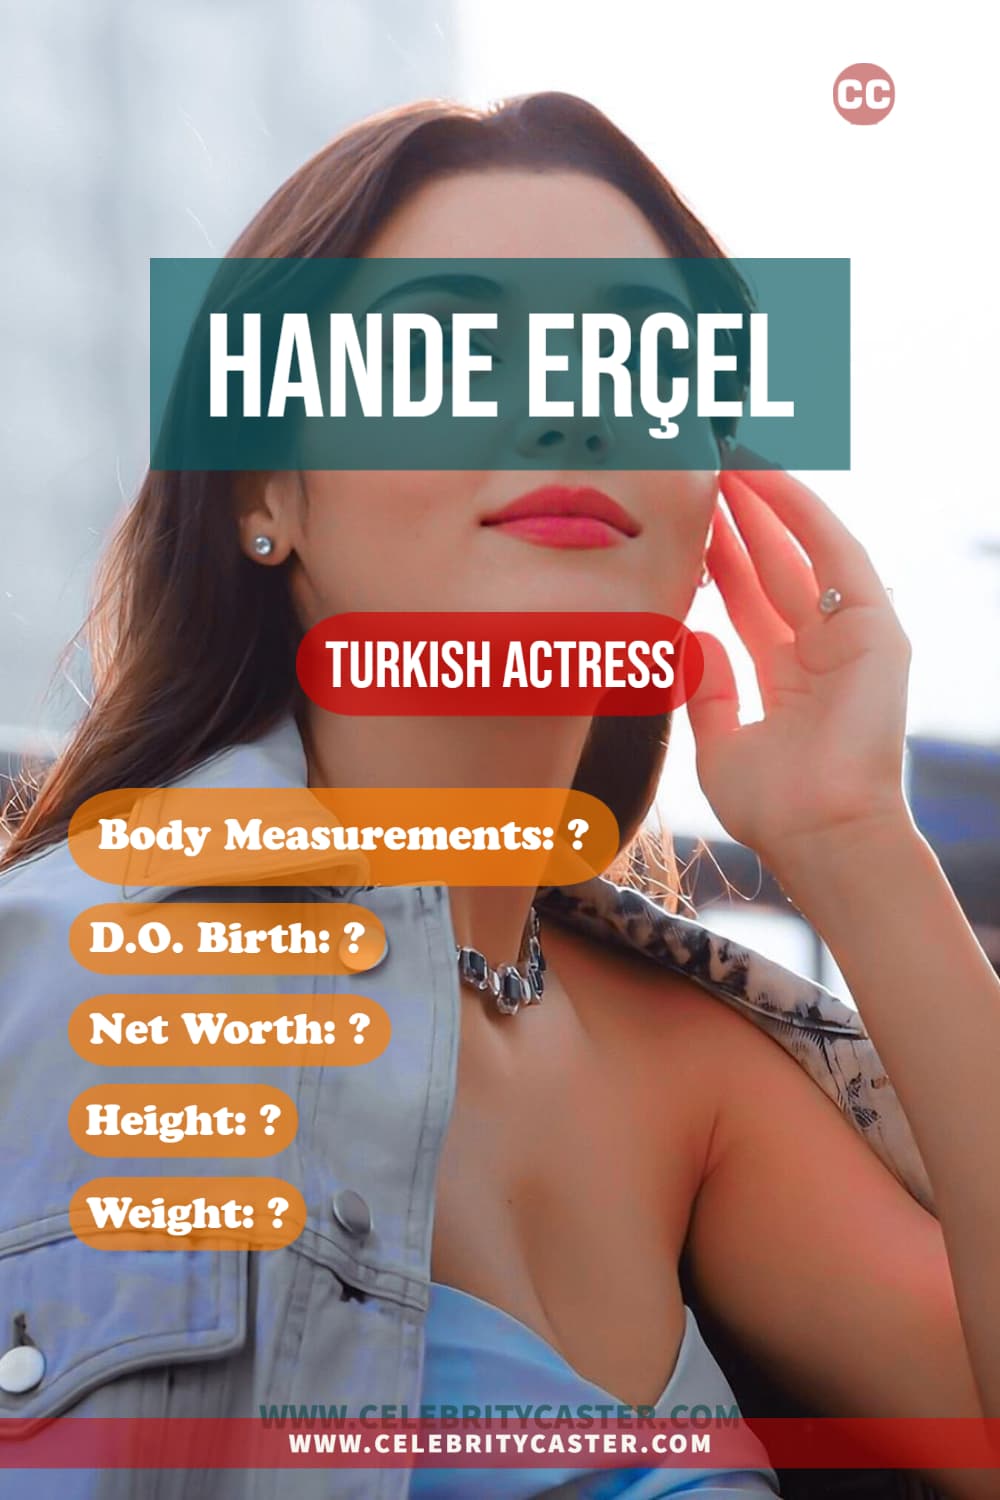 Beautiful Turkish Actresses, Female Actresses, Female Turkish Actresses, Hande Erçel age, Hande Erçel height, Hande Erçel Measurements, Hande Erçel weight, Most Beautiful Girls from Turkey, Turkish, Turkish Celebrities, Turkish Drama Actresses, Turkish Film Actresses, Turkish Girls, Turkish Movie Actresses, Turkish Women